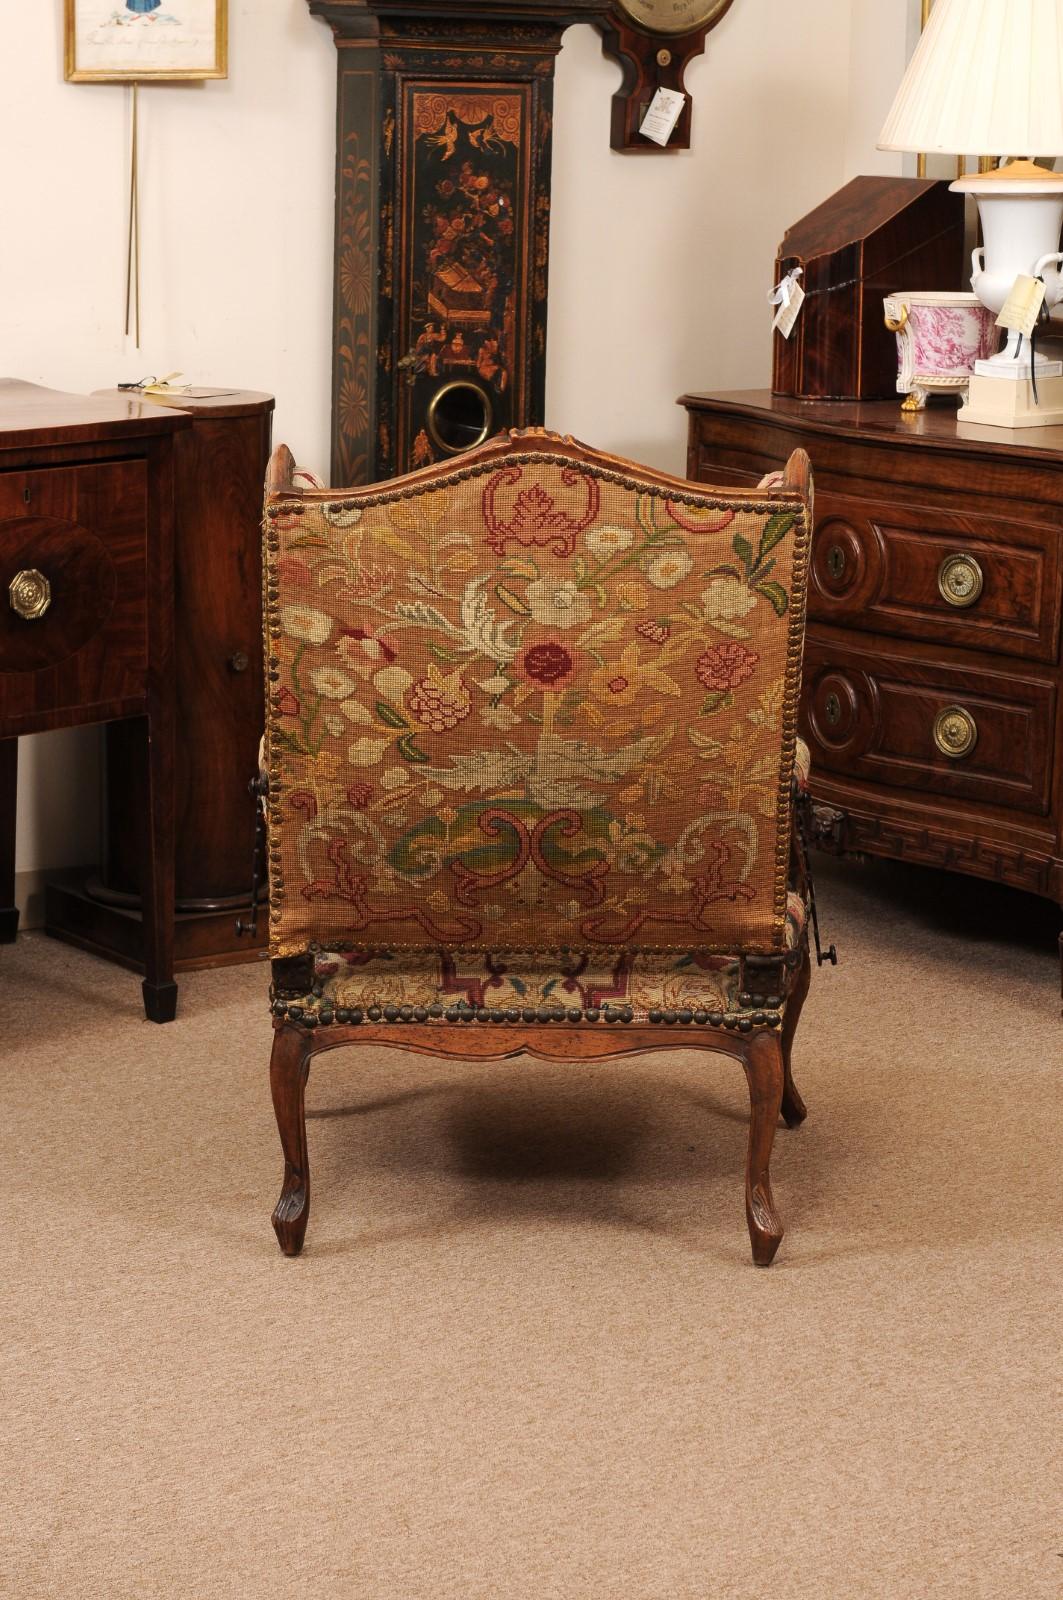 Early 18th Century French Regence Period Walnut Ratchet Wing Chair with Needlewo For Sale 5